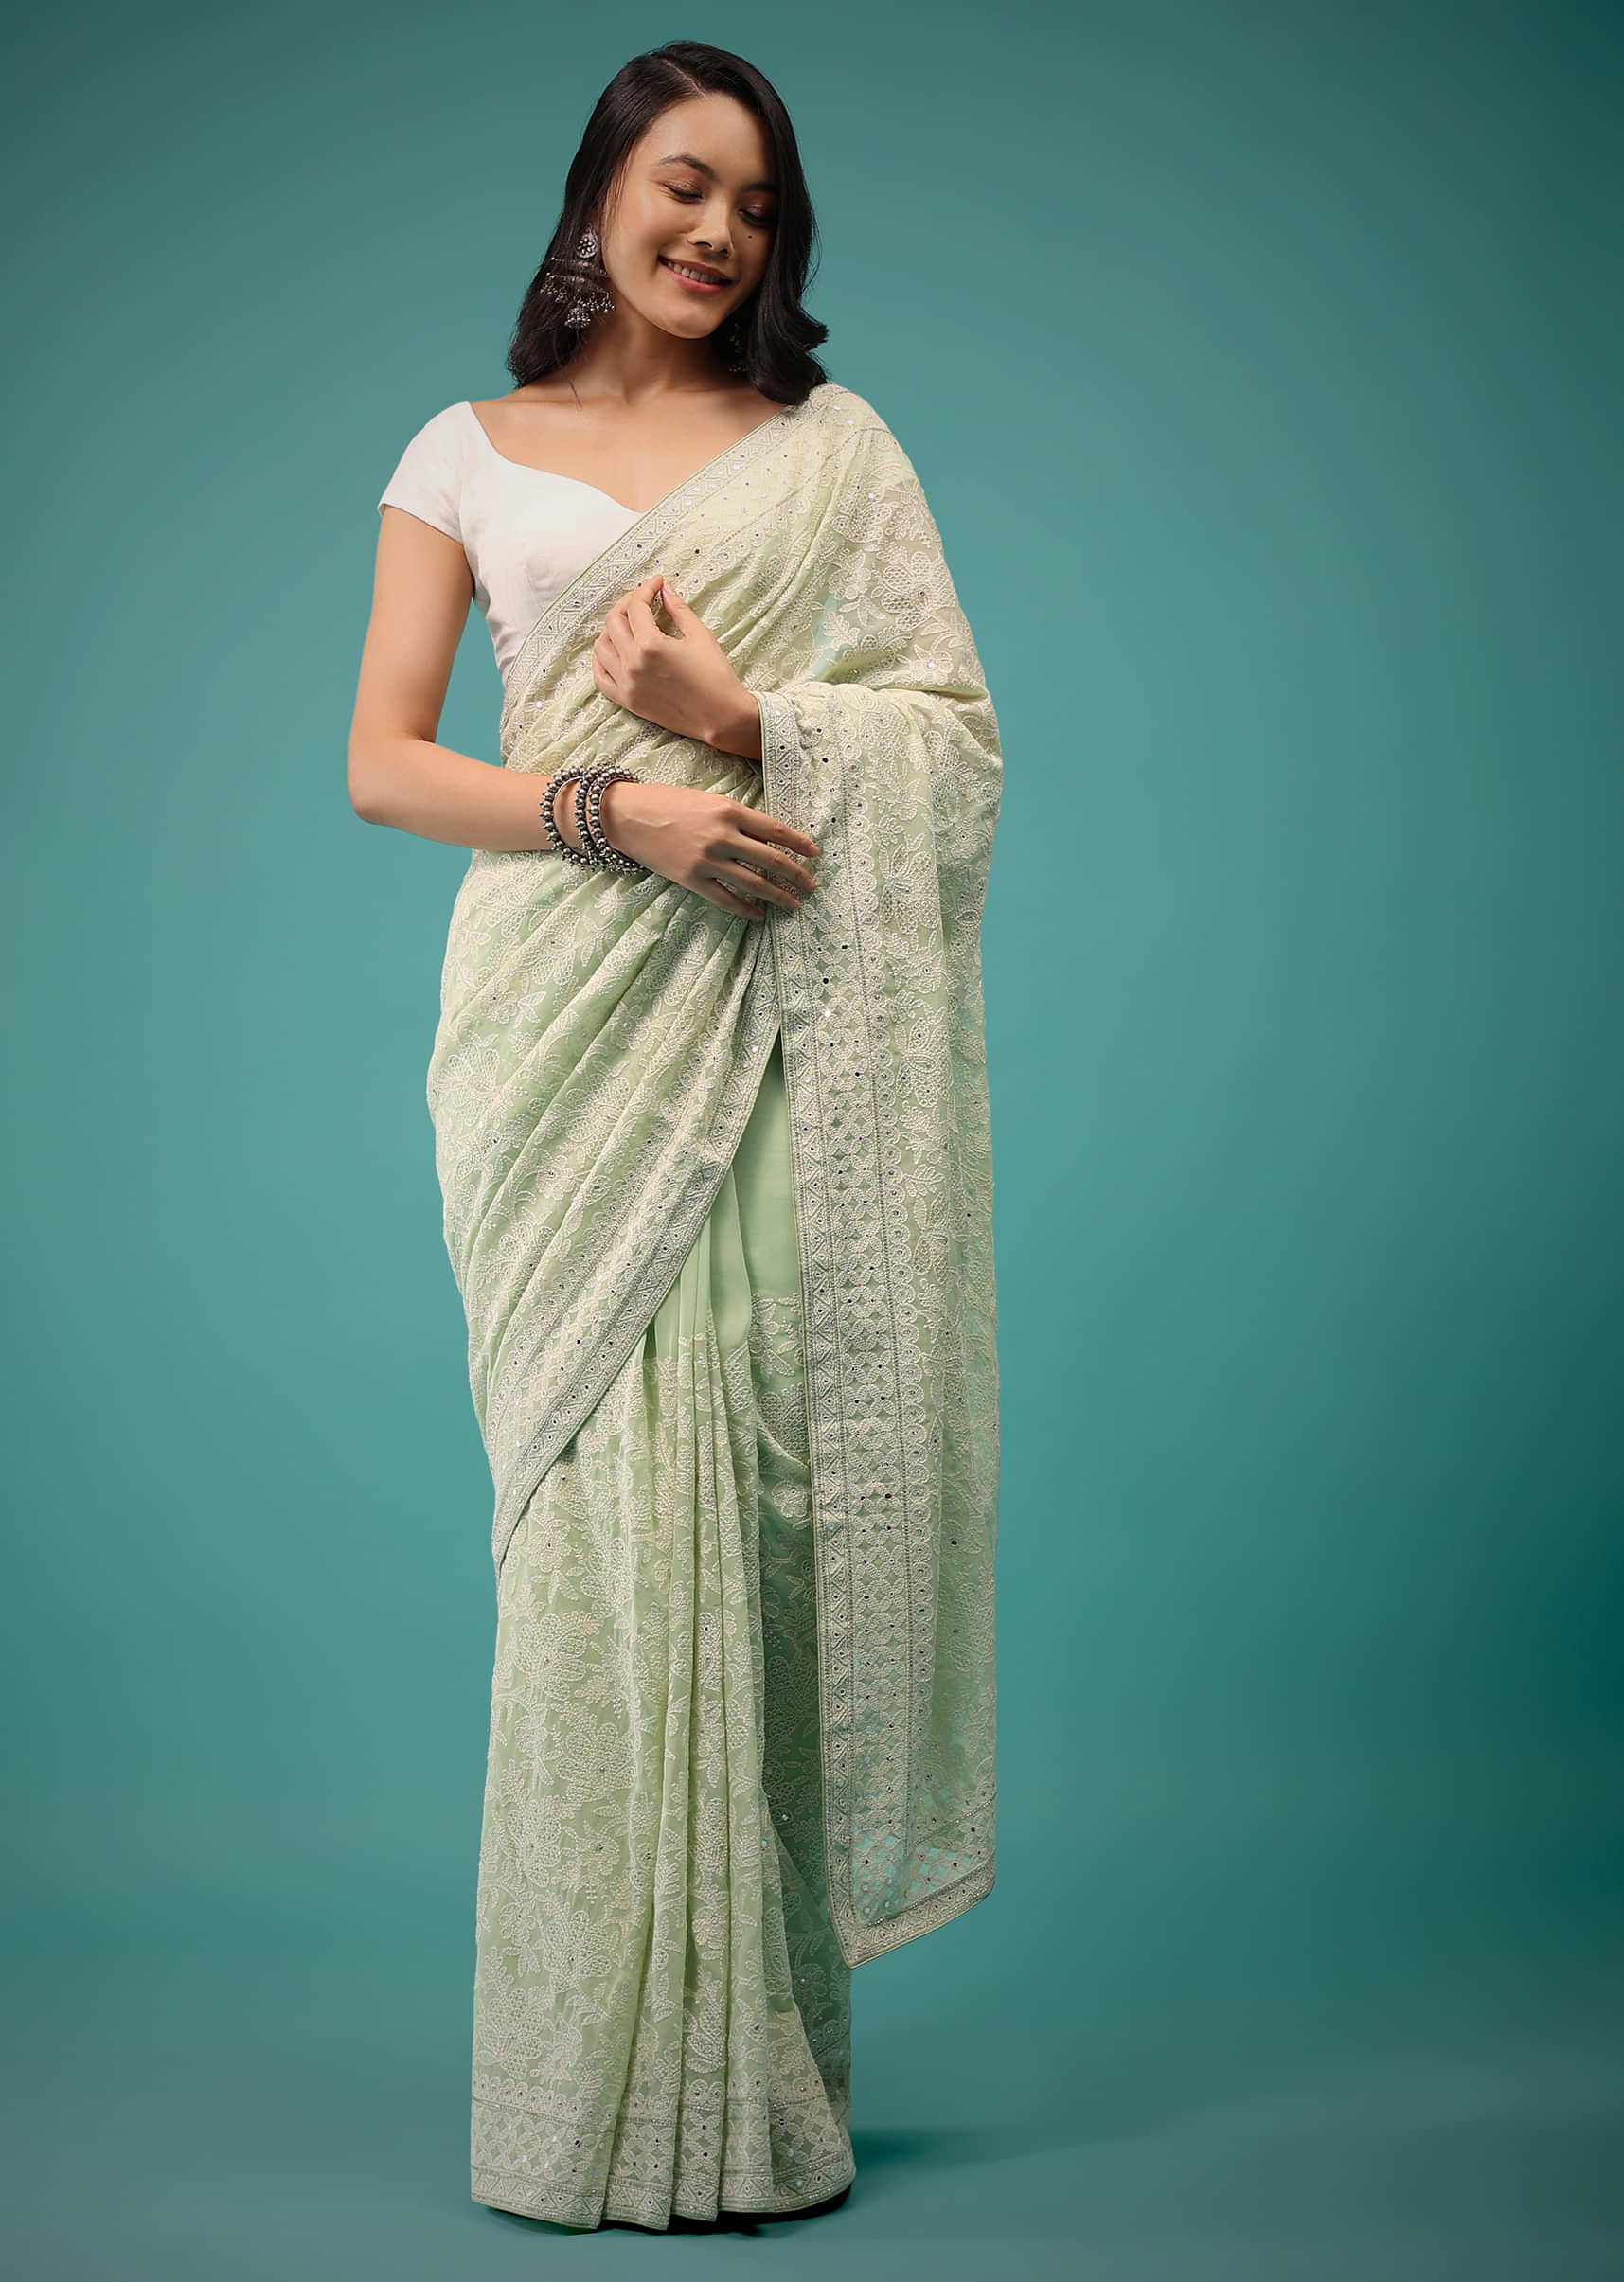 Pistachio Green Georgette Saree In Lucknowi Threadwork, Comes With Mirror Embroidery Detailing On The Border